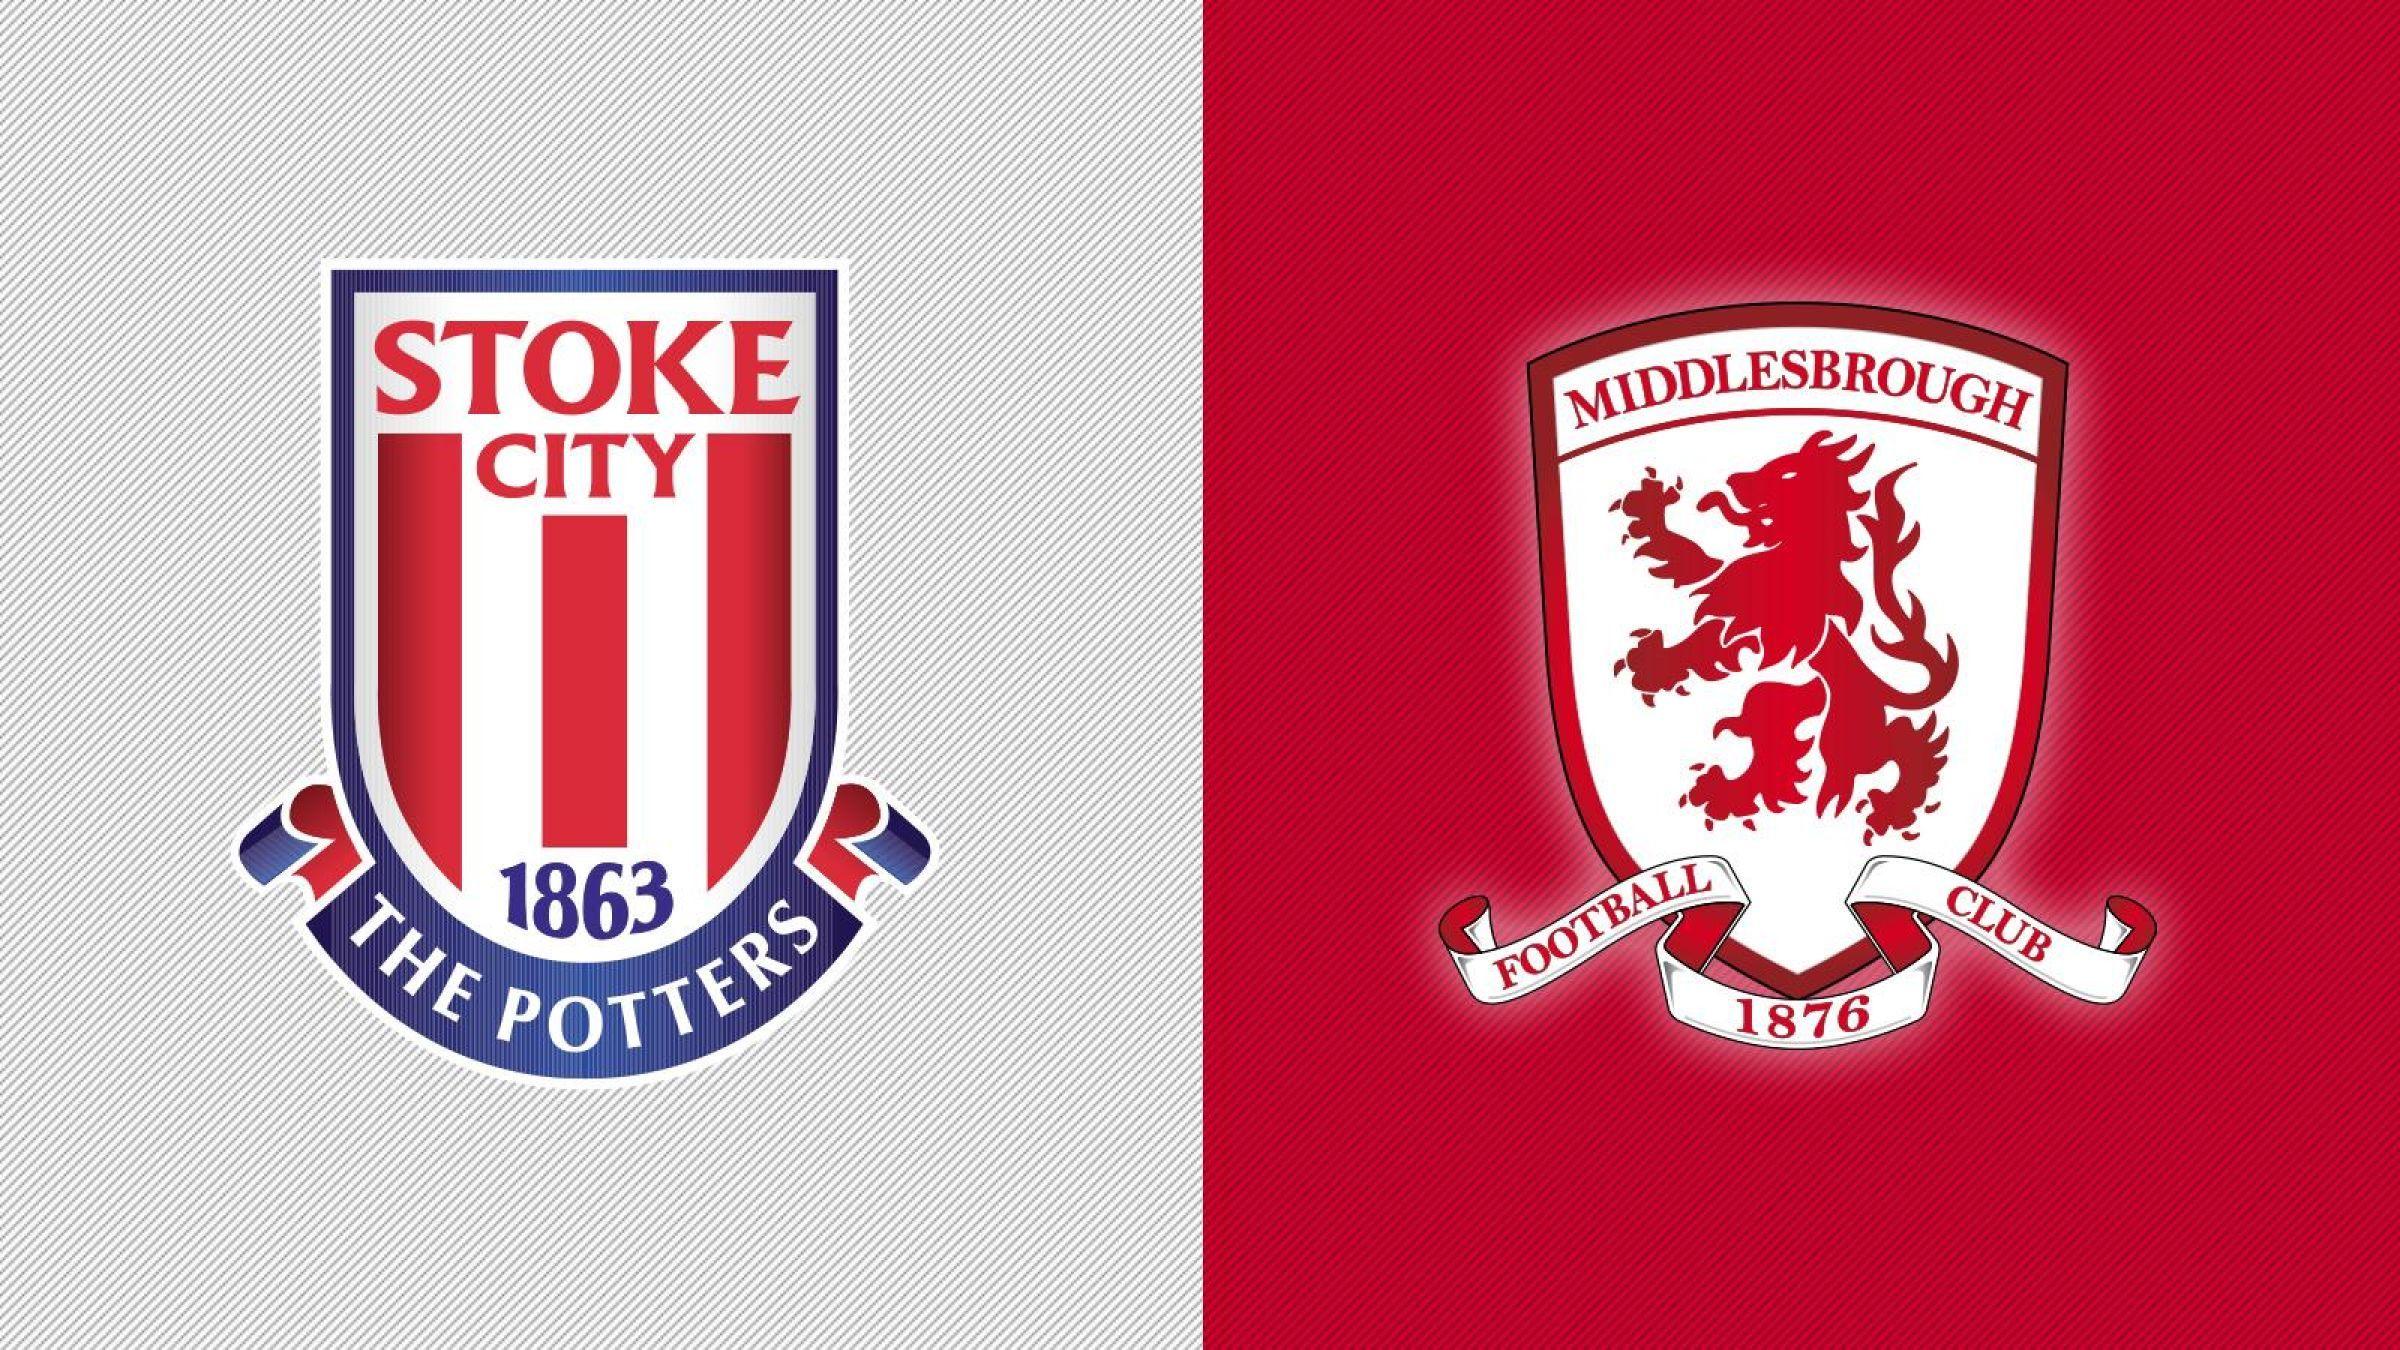 Stoke City Logo - Beamback: Sold Out Stoke City Game To Be Shown At The Riverside